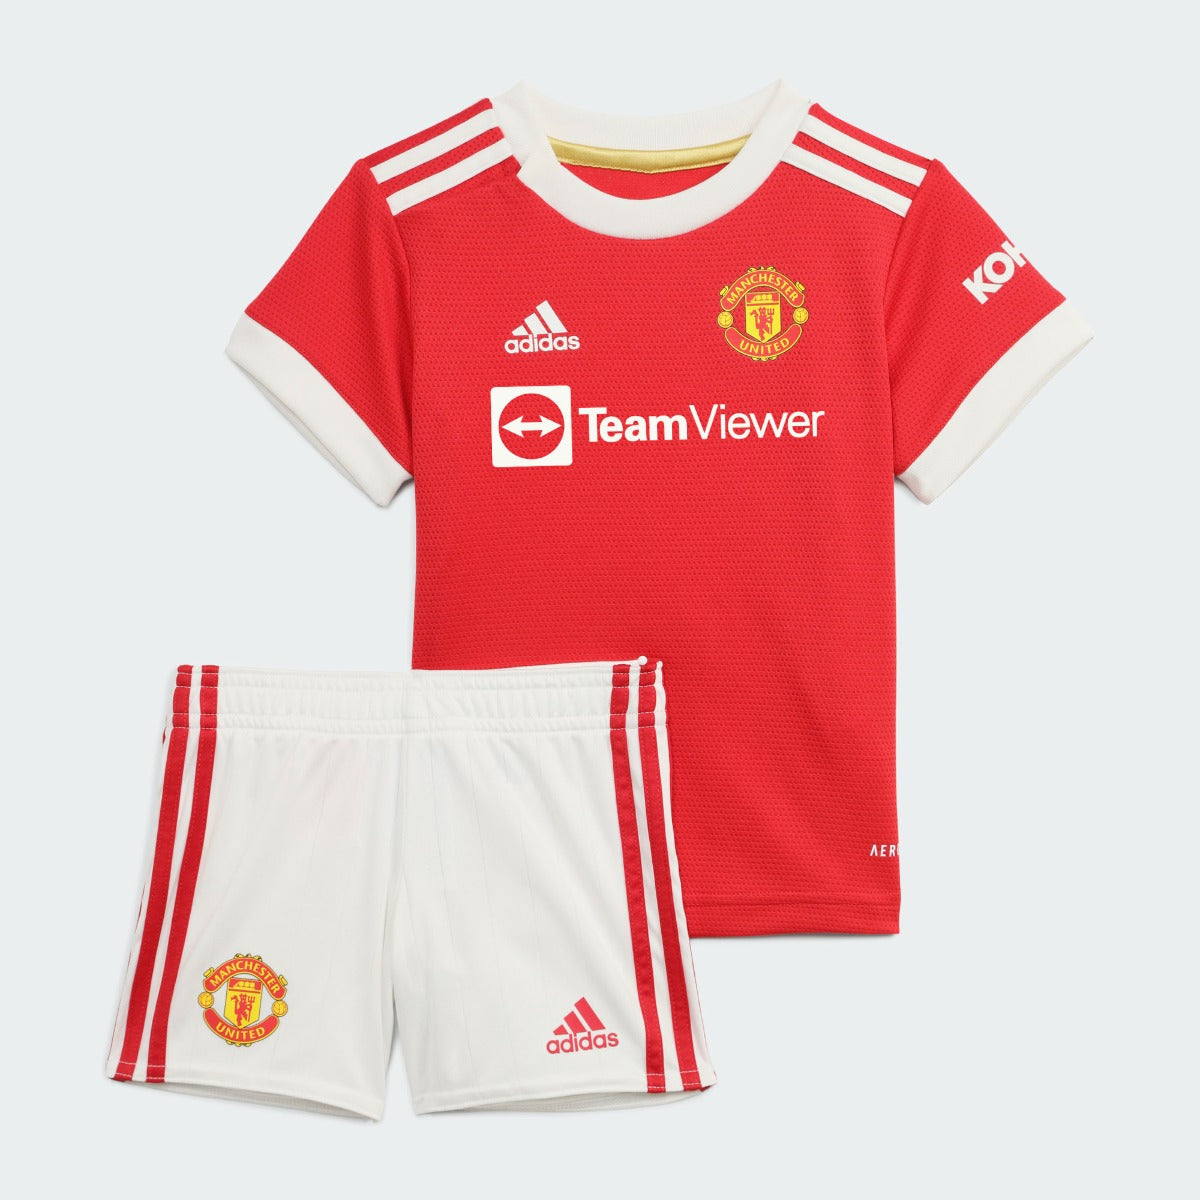 Adidas 2021-22 Manchester United Home Baby Set - Red-White (Set)